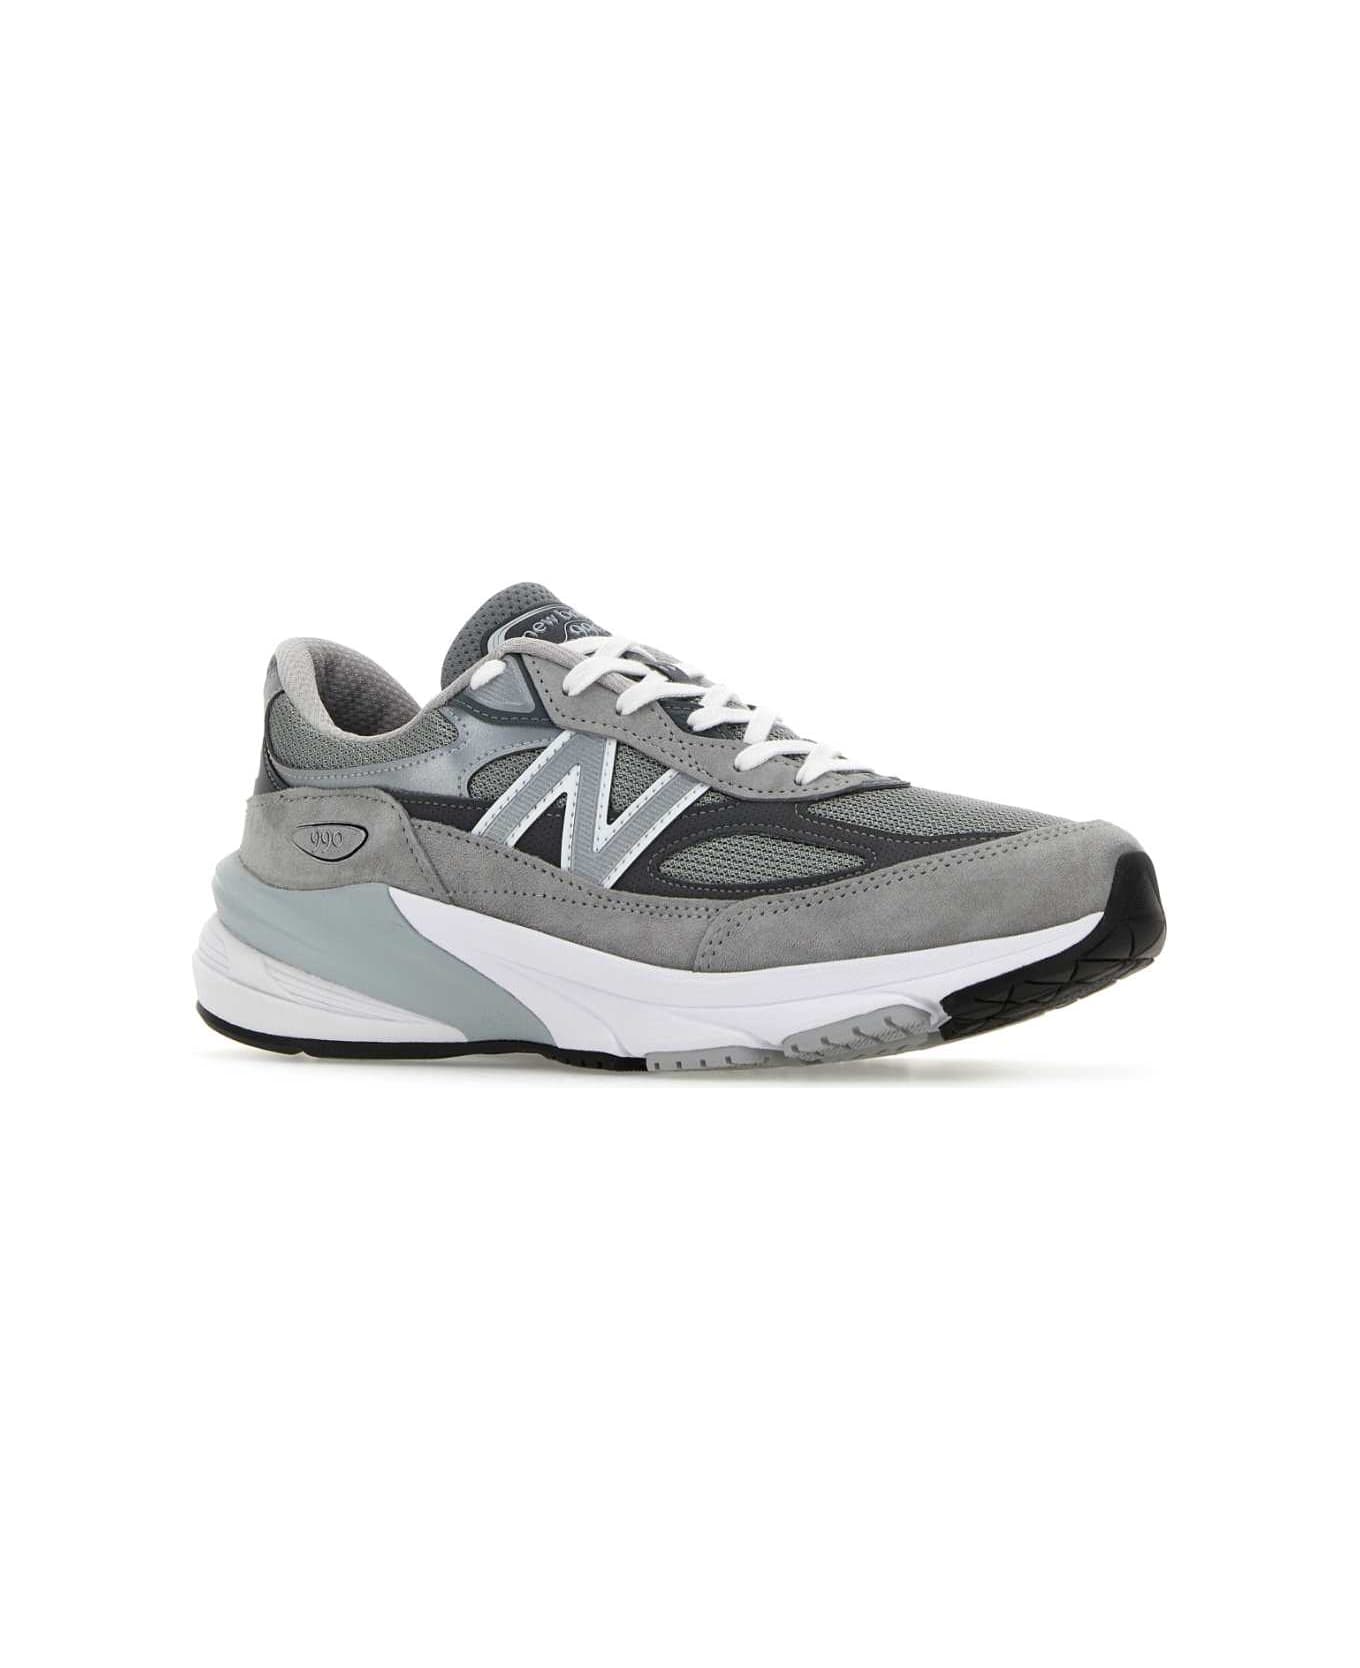 New Balance Multicolor Fabric And Suede 990v6 Sneakers - COOLGREY